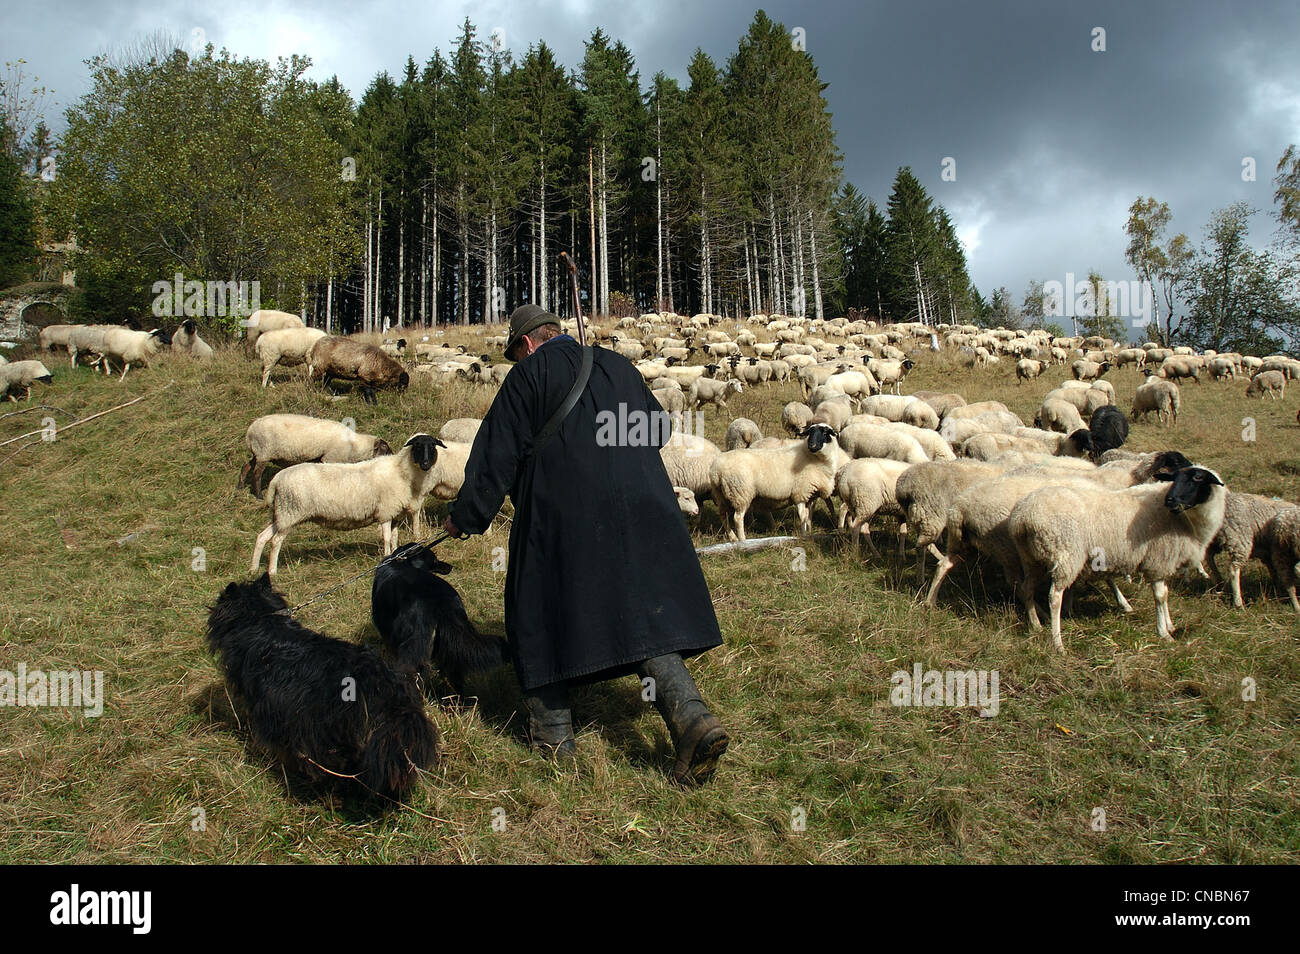 A flock of sheep with shepherd in Schwarzwald, Germany Stock Photo